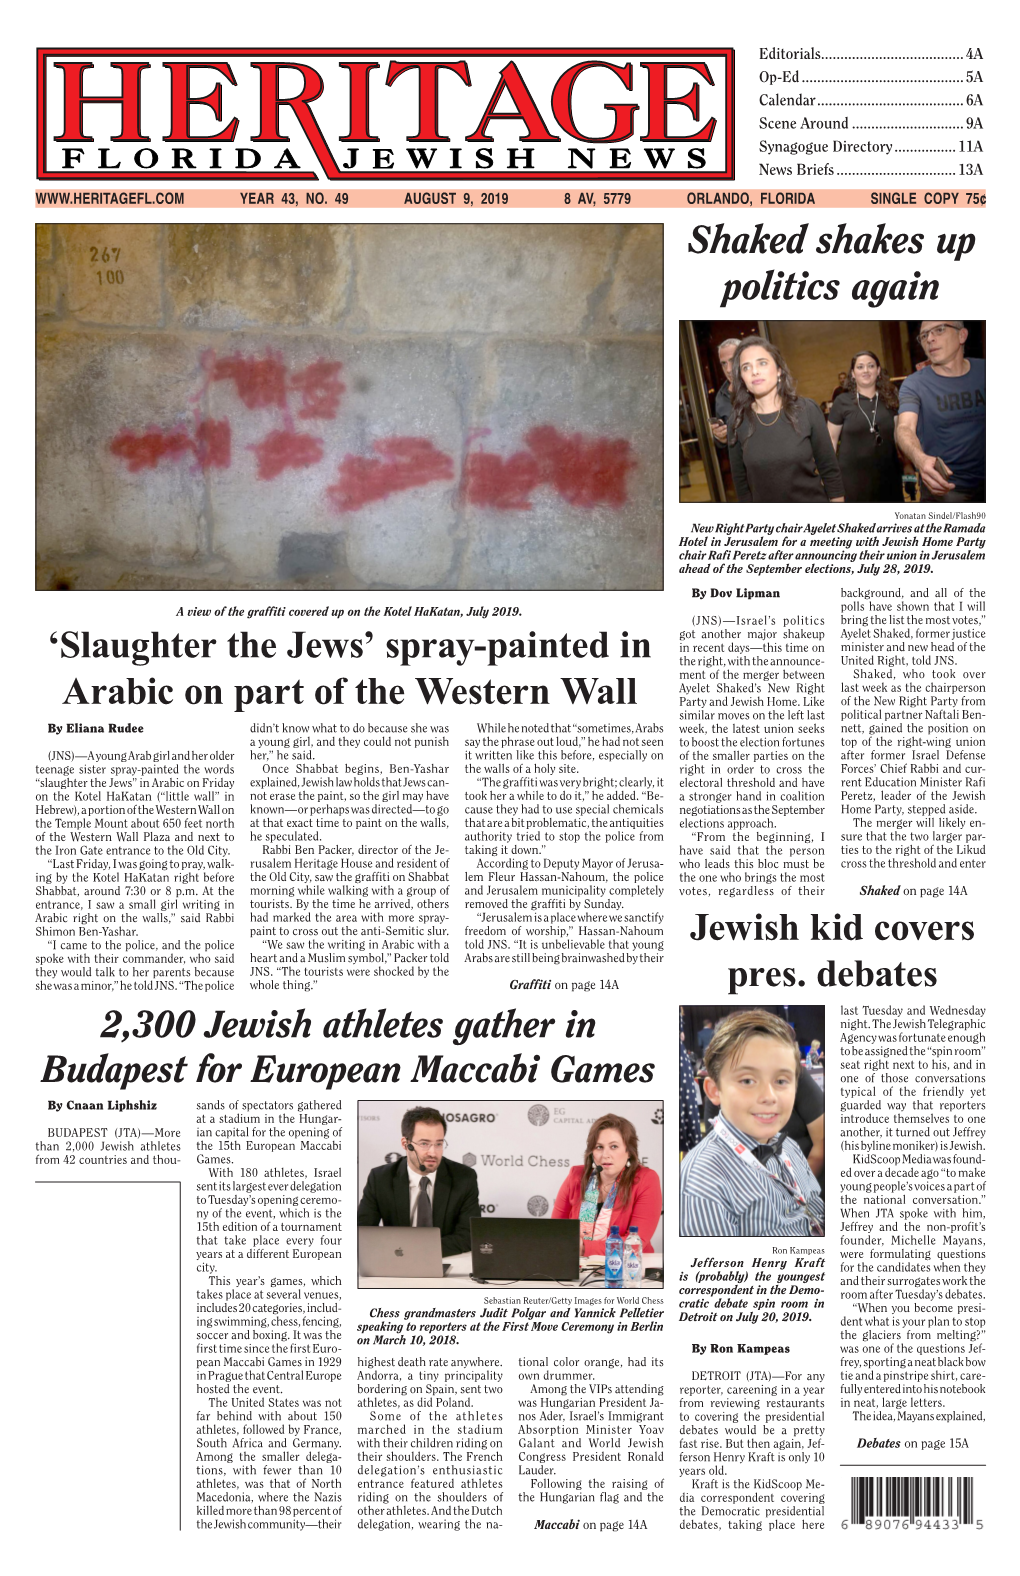 Slaughter the Jews’ Spray-Painted in the Right, with the Announce- United Right, Told JNS